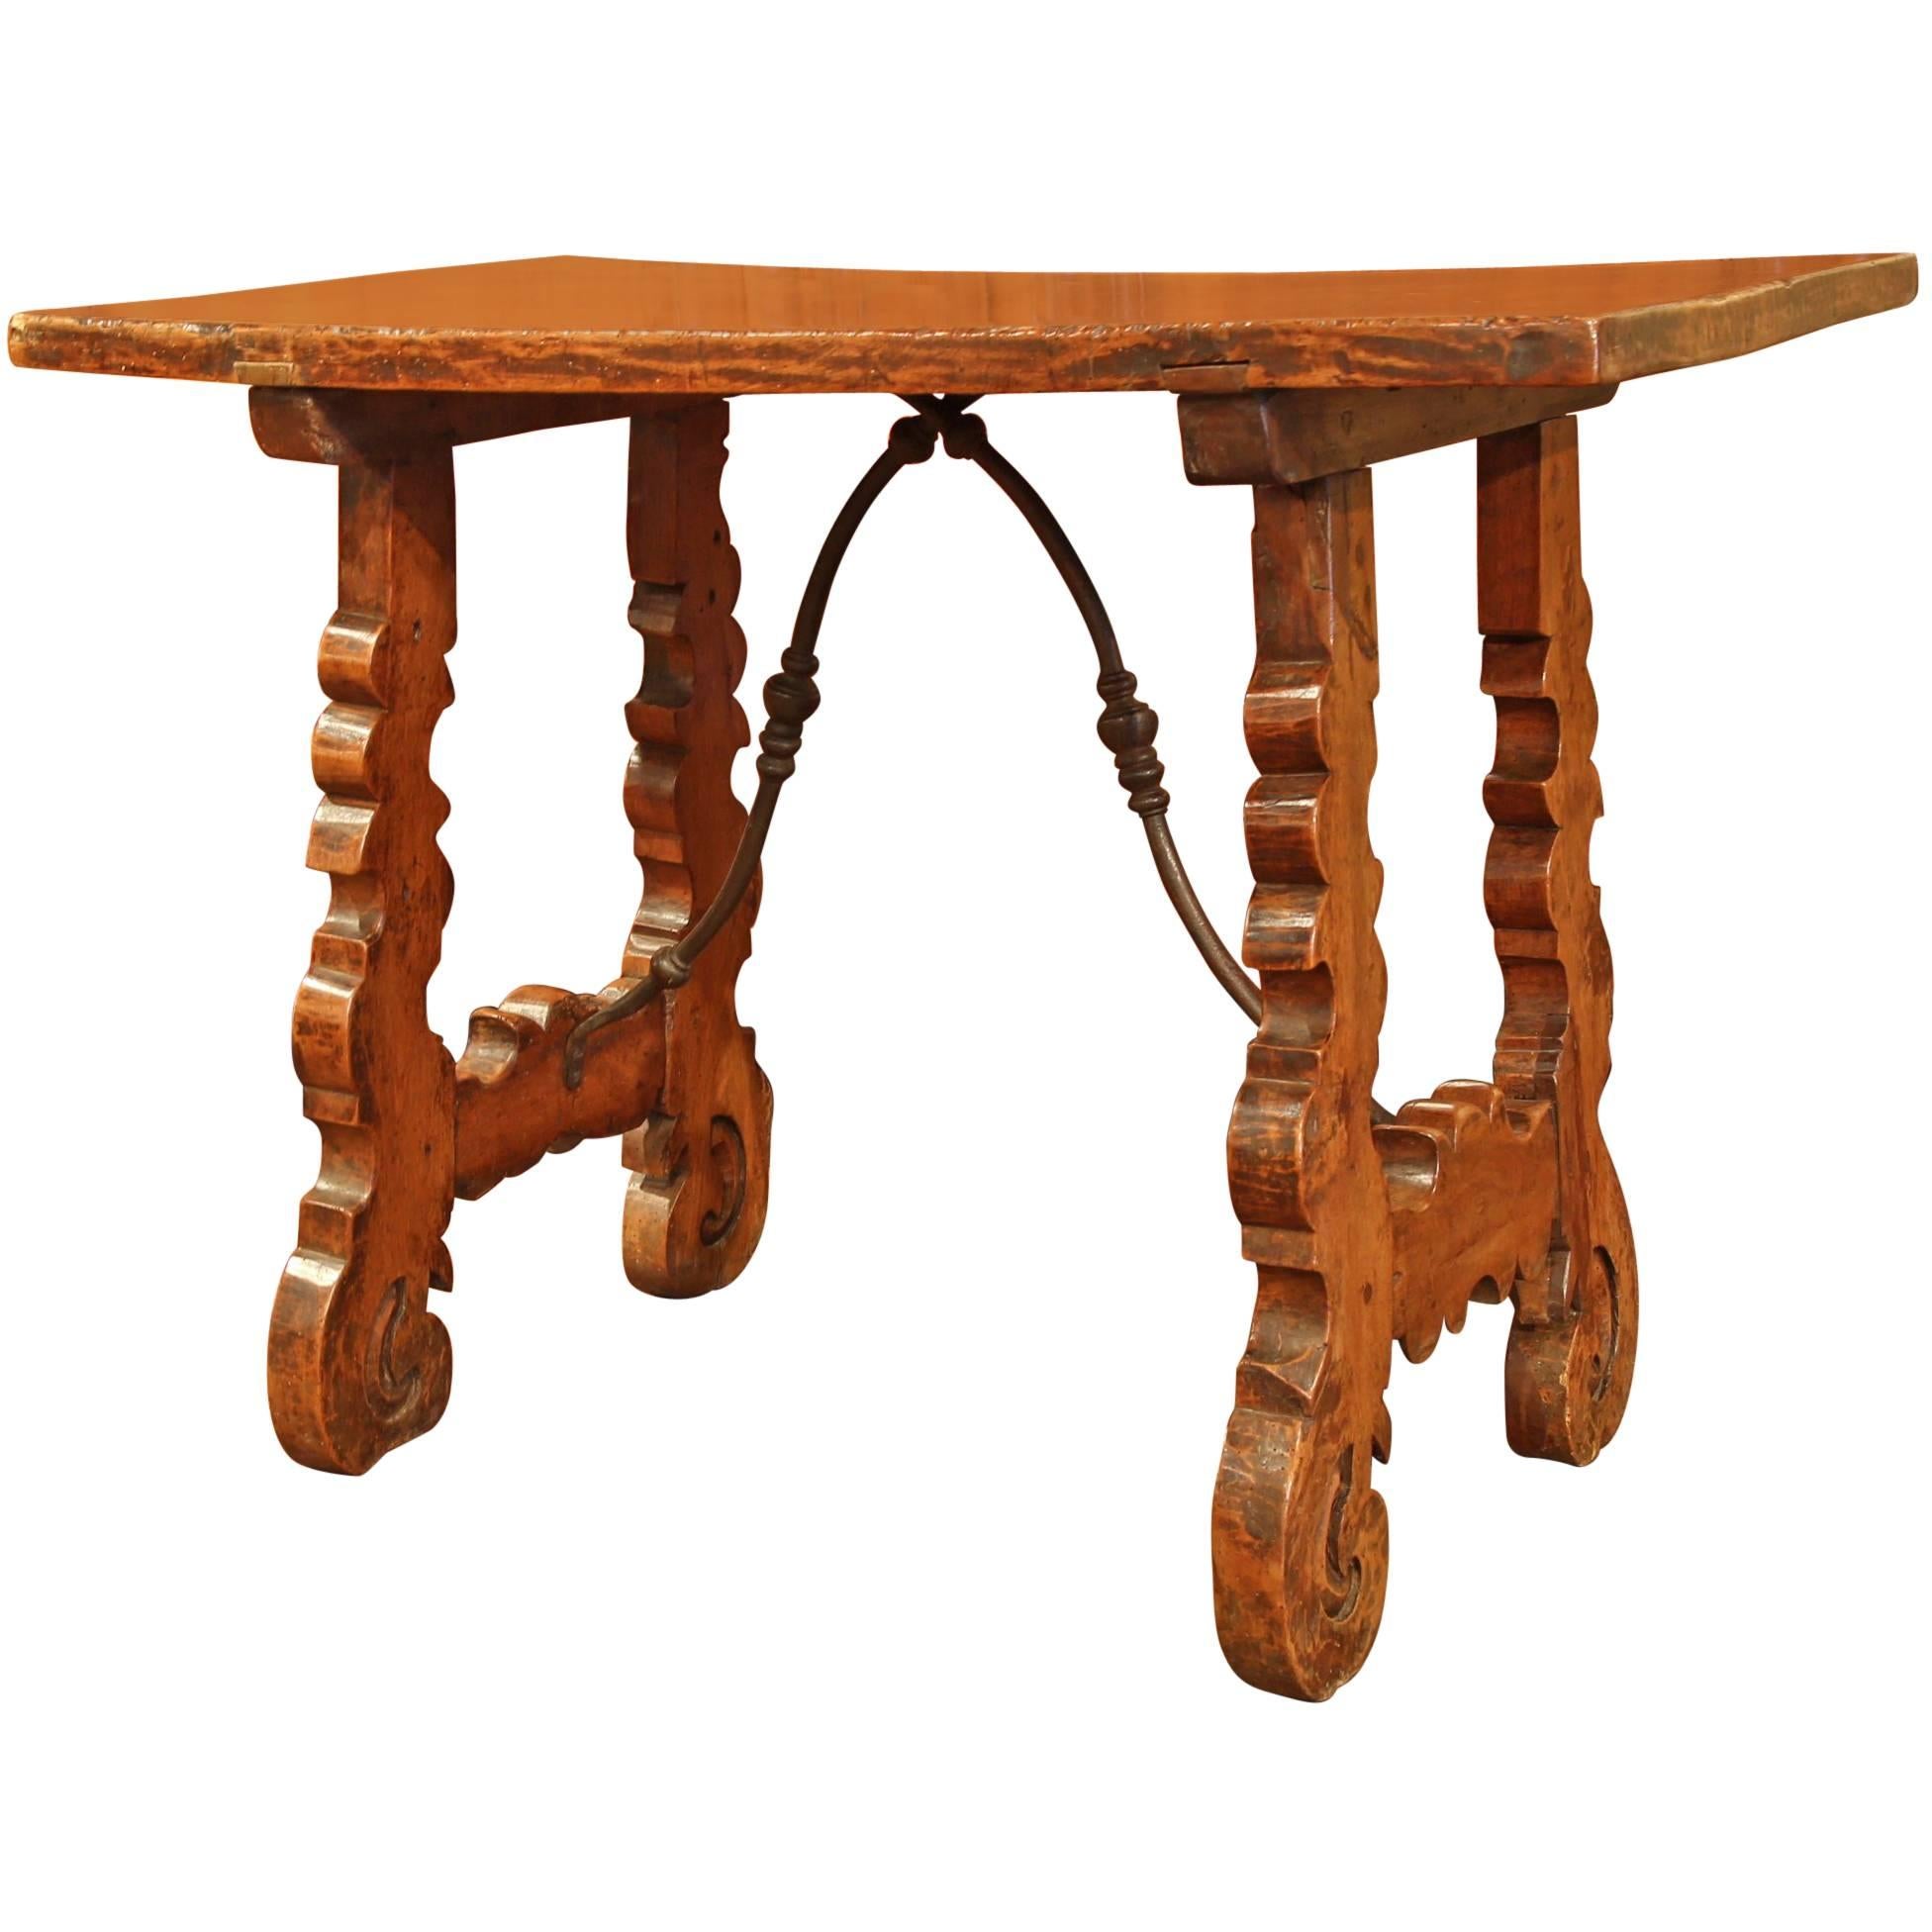 Mid-18th Century Spanish Walnut Table with Iron Stretcher and Single Plank Top